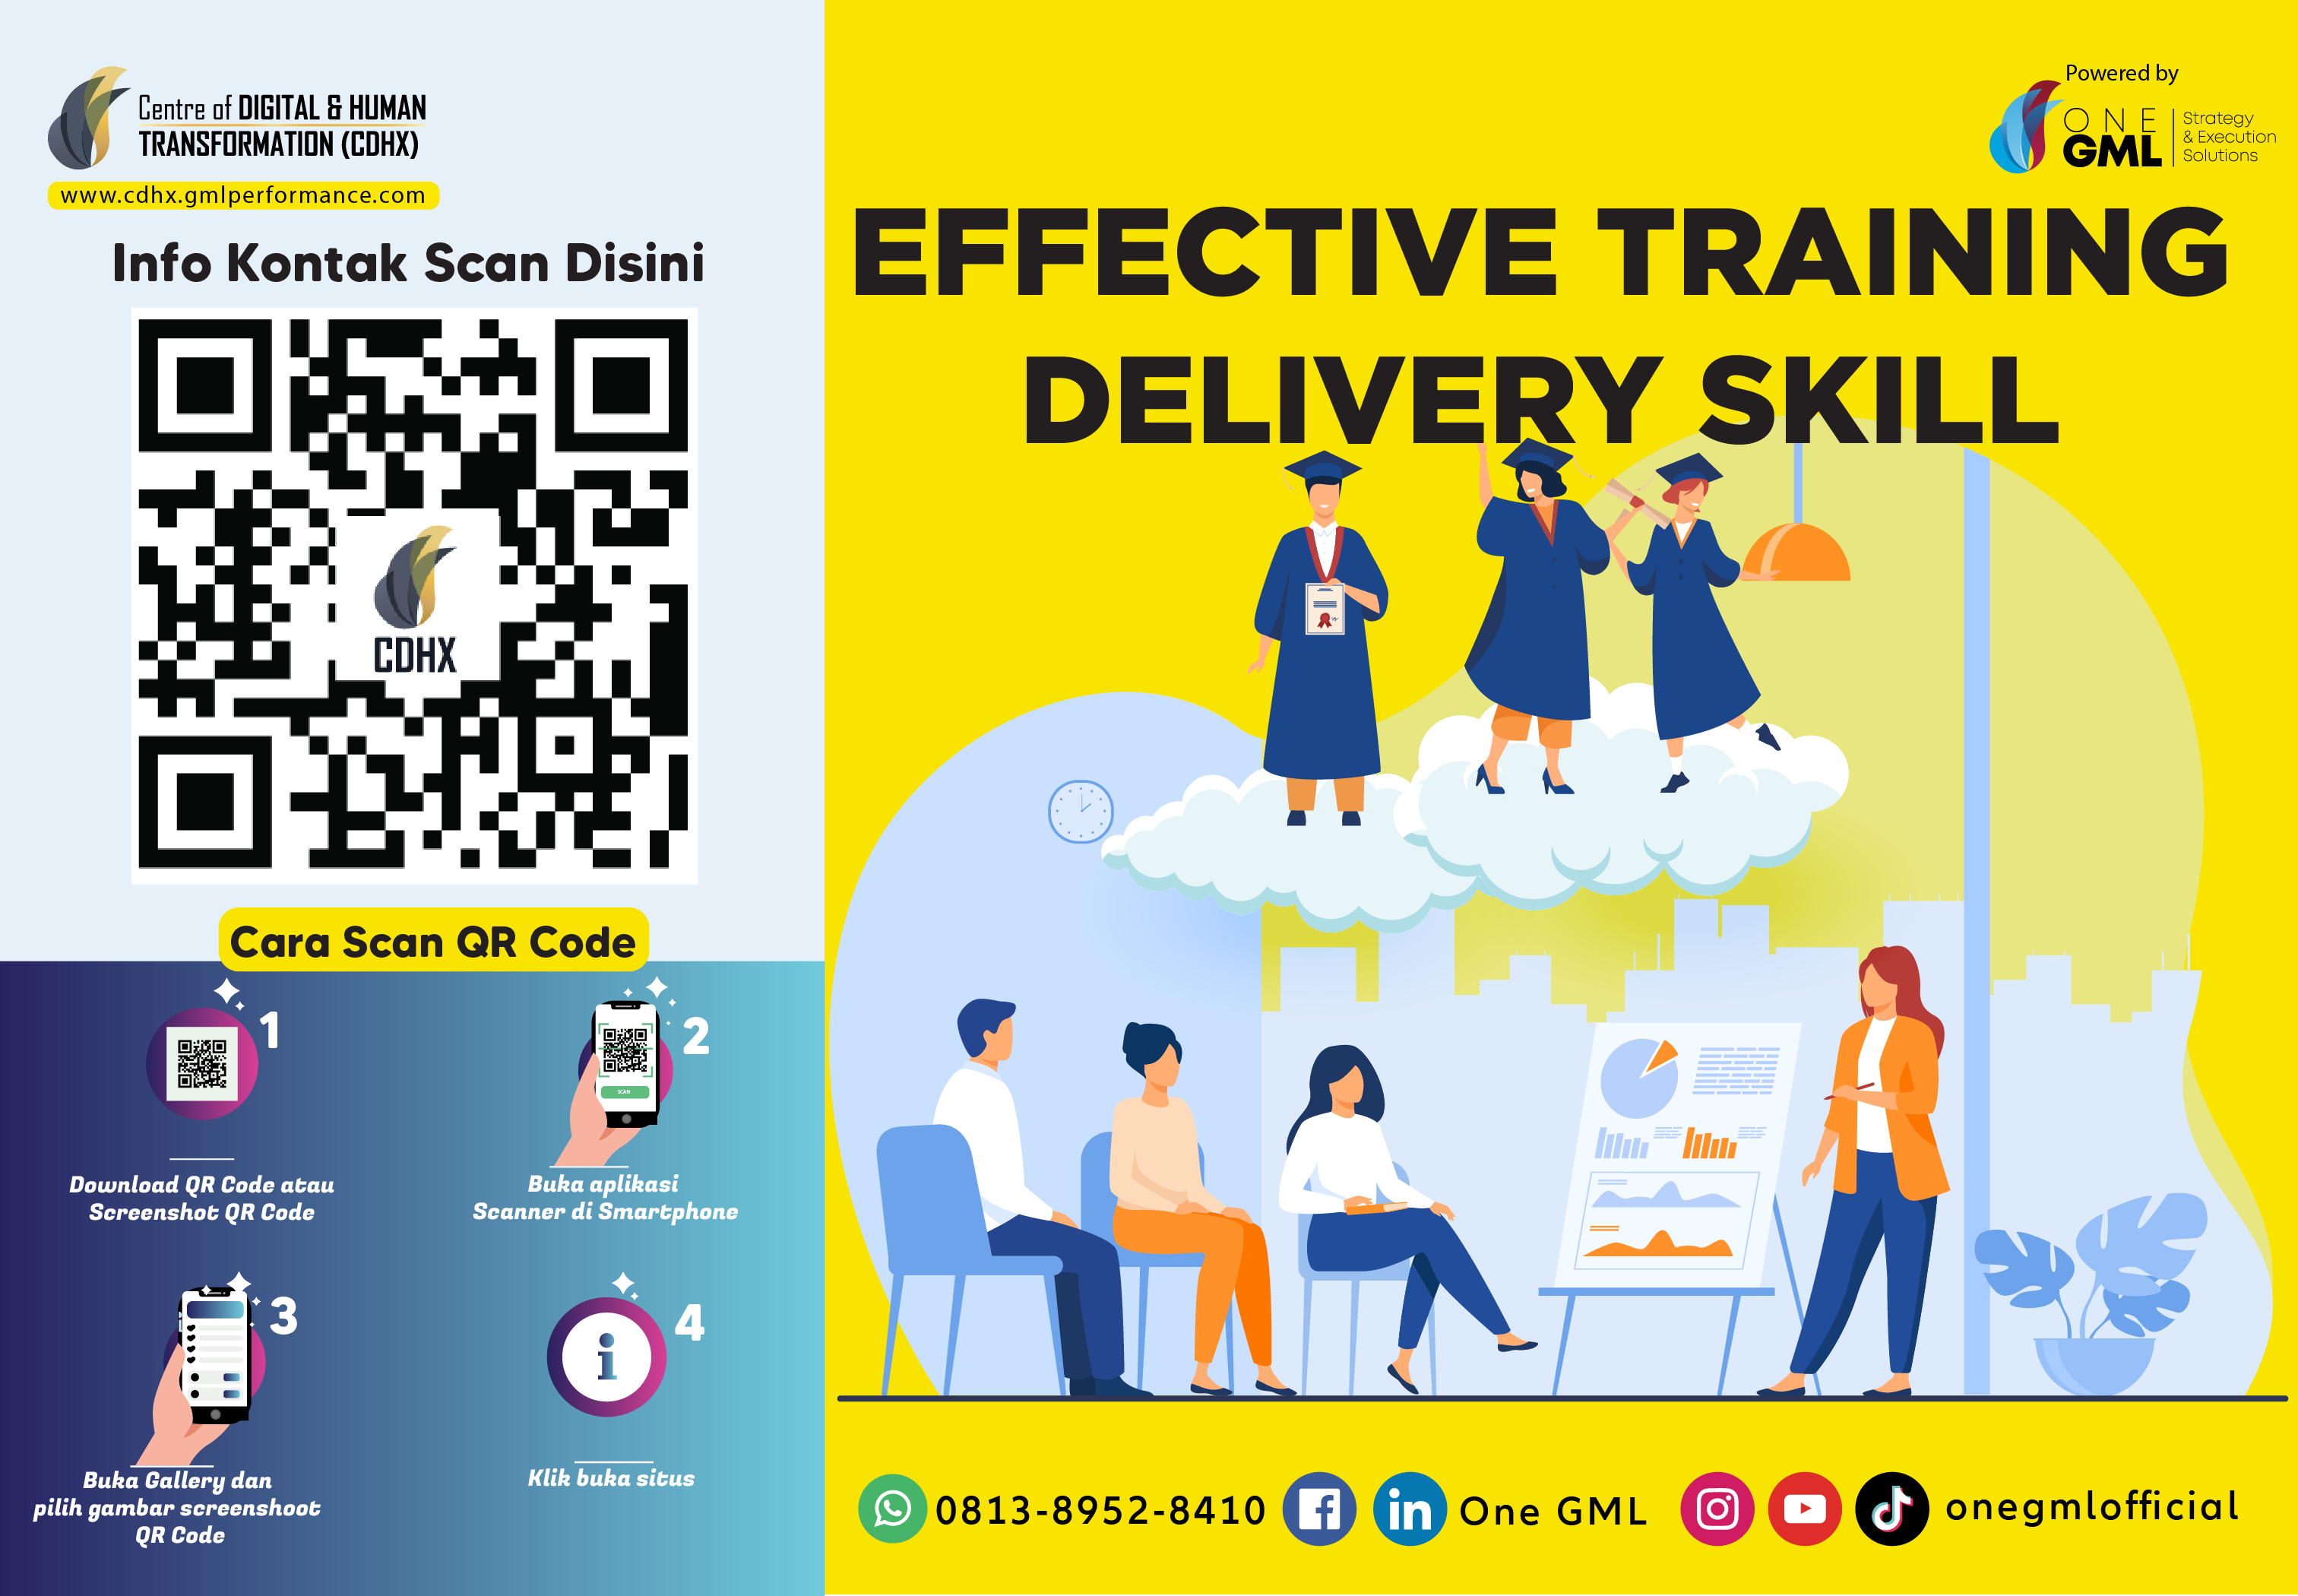 Effective Training Delivery Skill